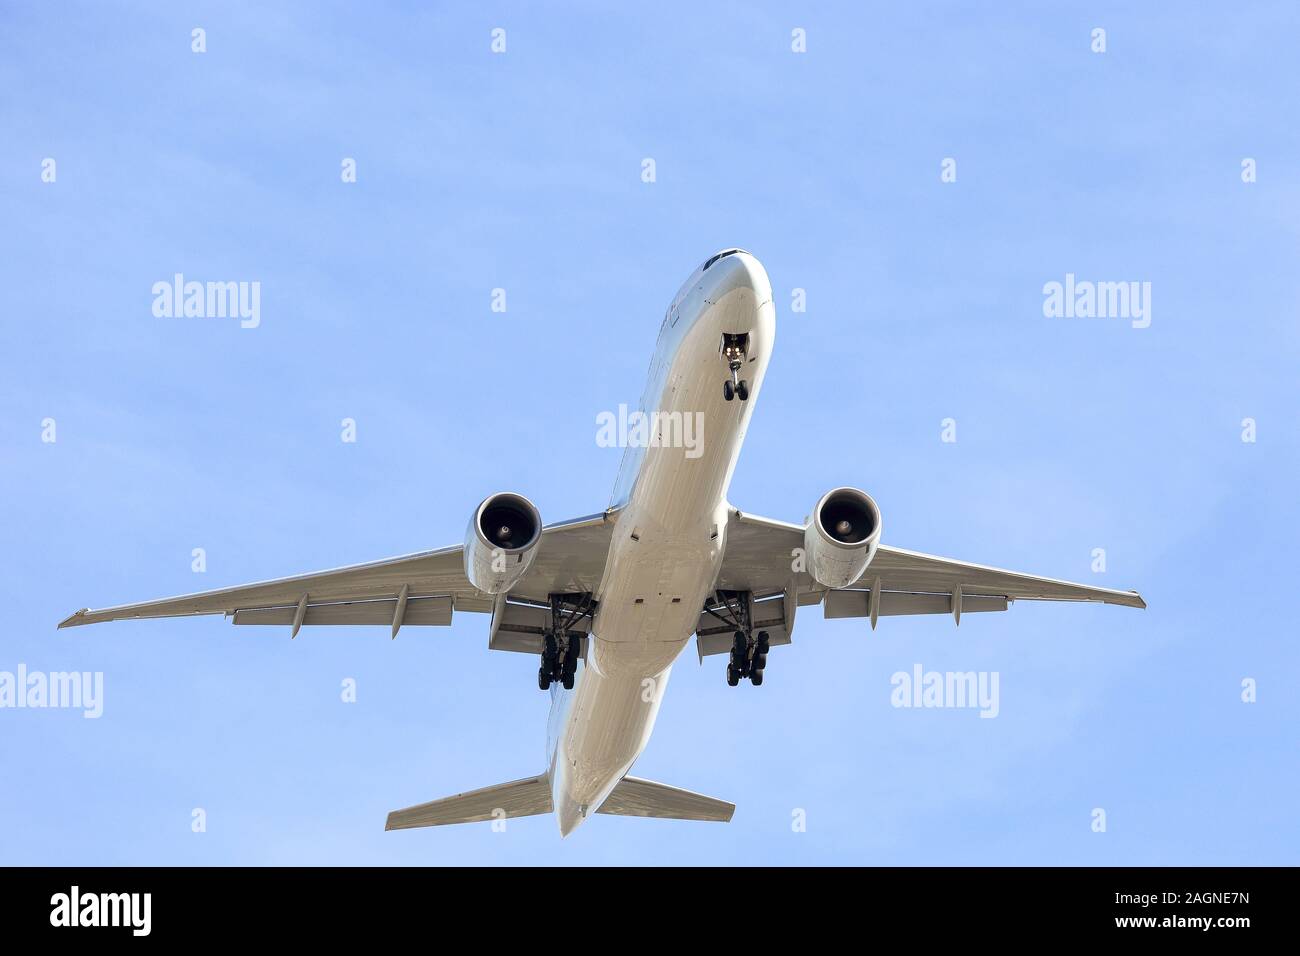 A commercial airliner preparing to land on Los Angeles airport Stock Photo